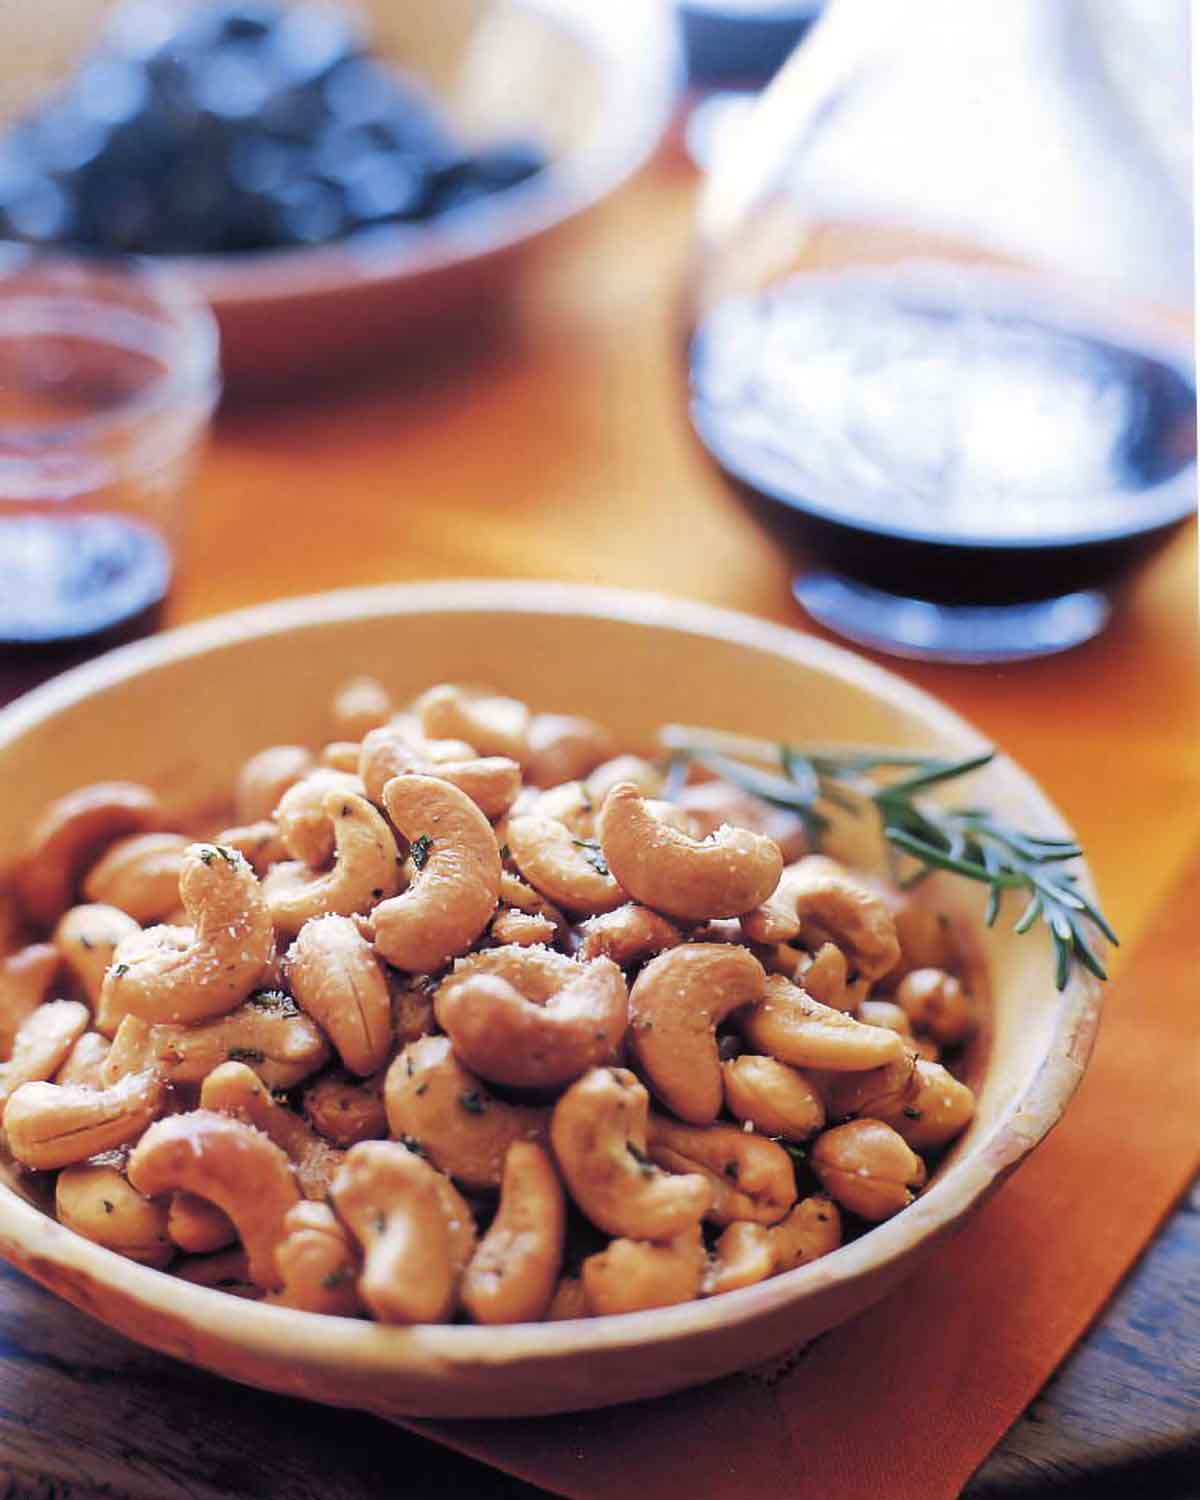 A bowl filled with Ina Garten's rosemary cashews with a sprig of rosemary on the side.